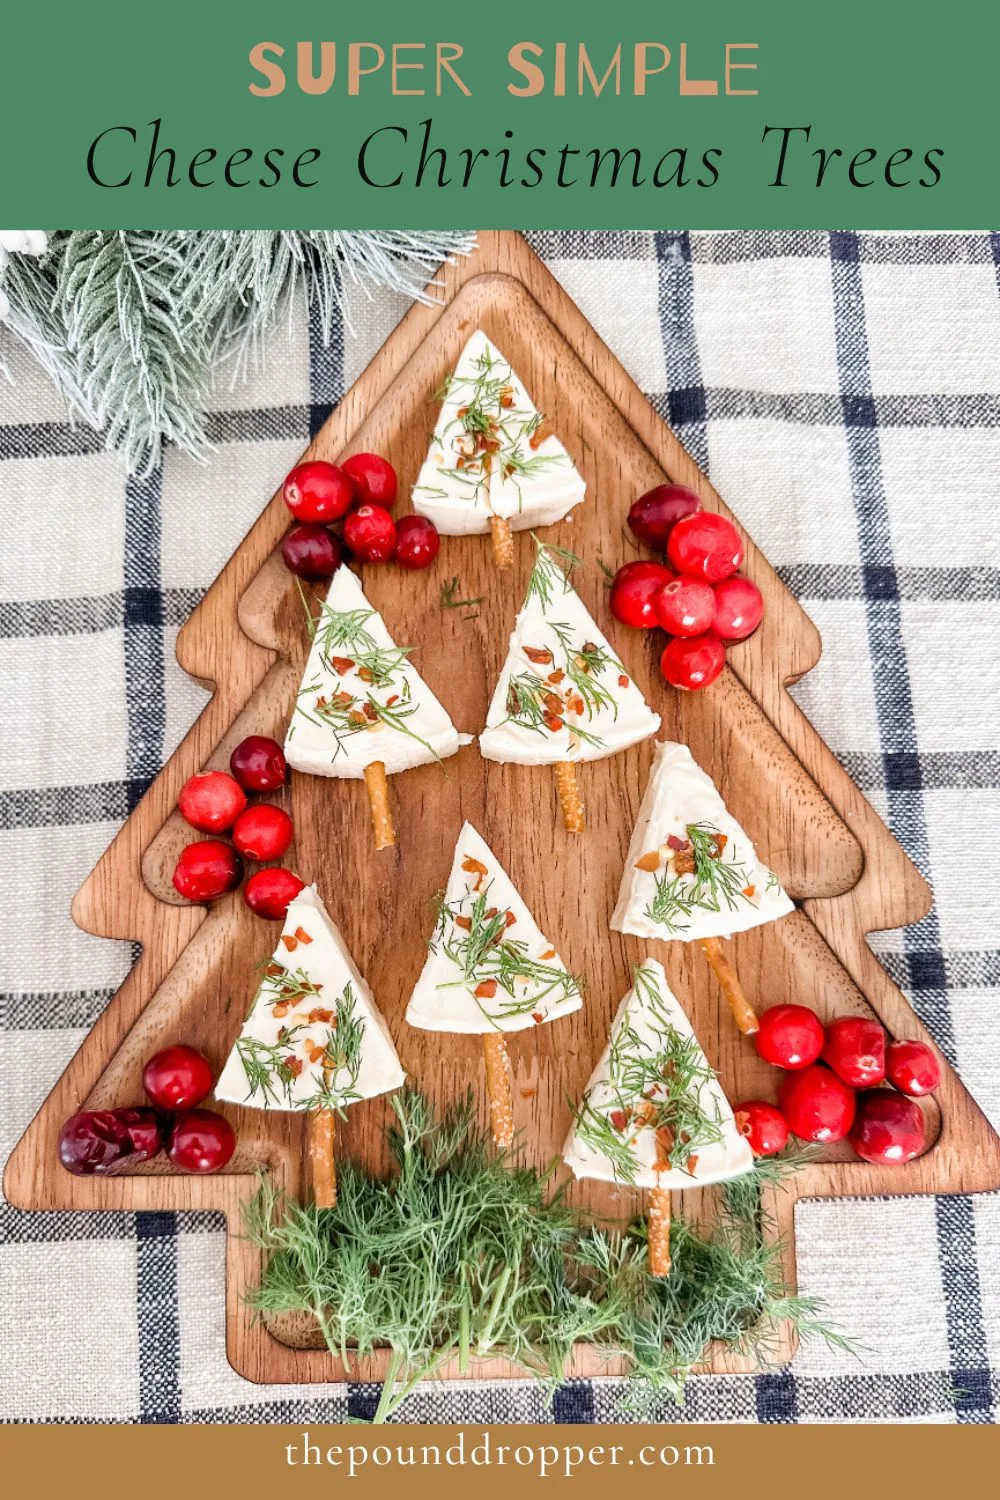 Here's a Pinterest inspired festive Christmas Tree Cheese Board that will impress your guests with this holiday season! A quick and easy festive appetizer using just 4 simple ingredients! via @pounddropper